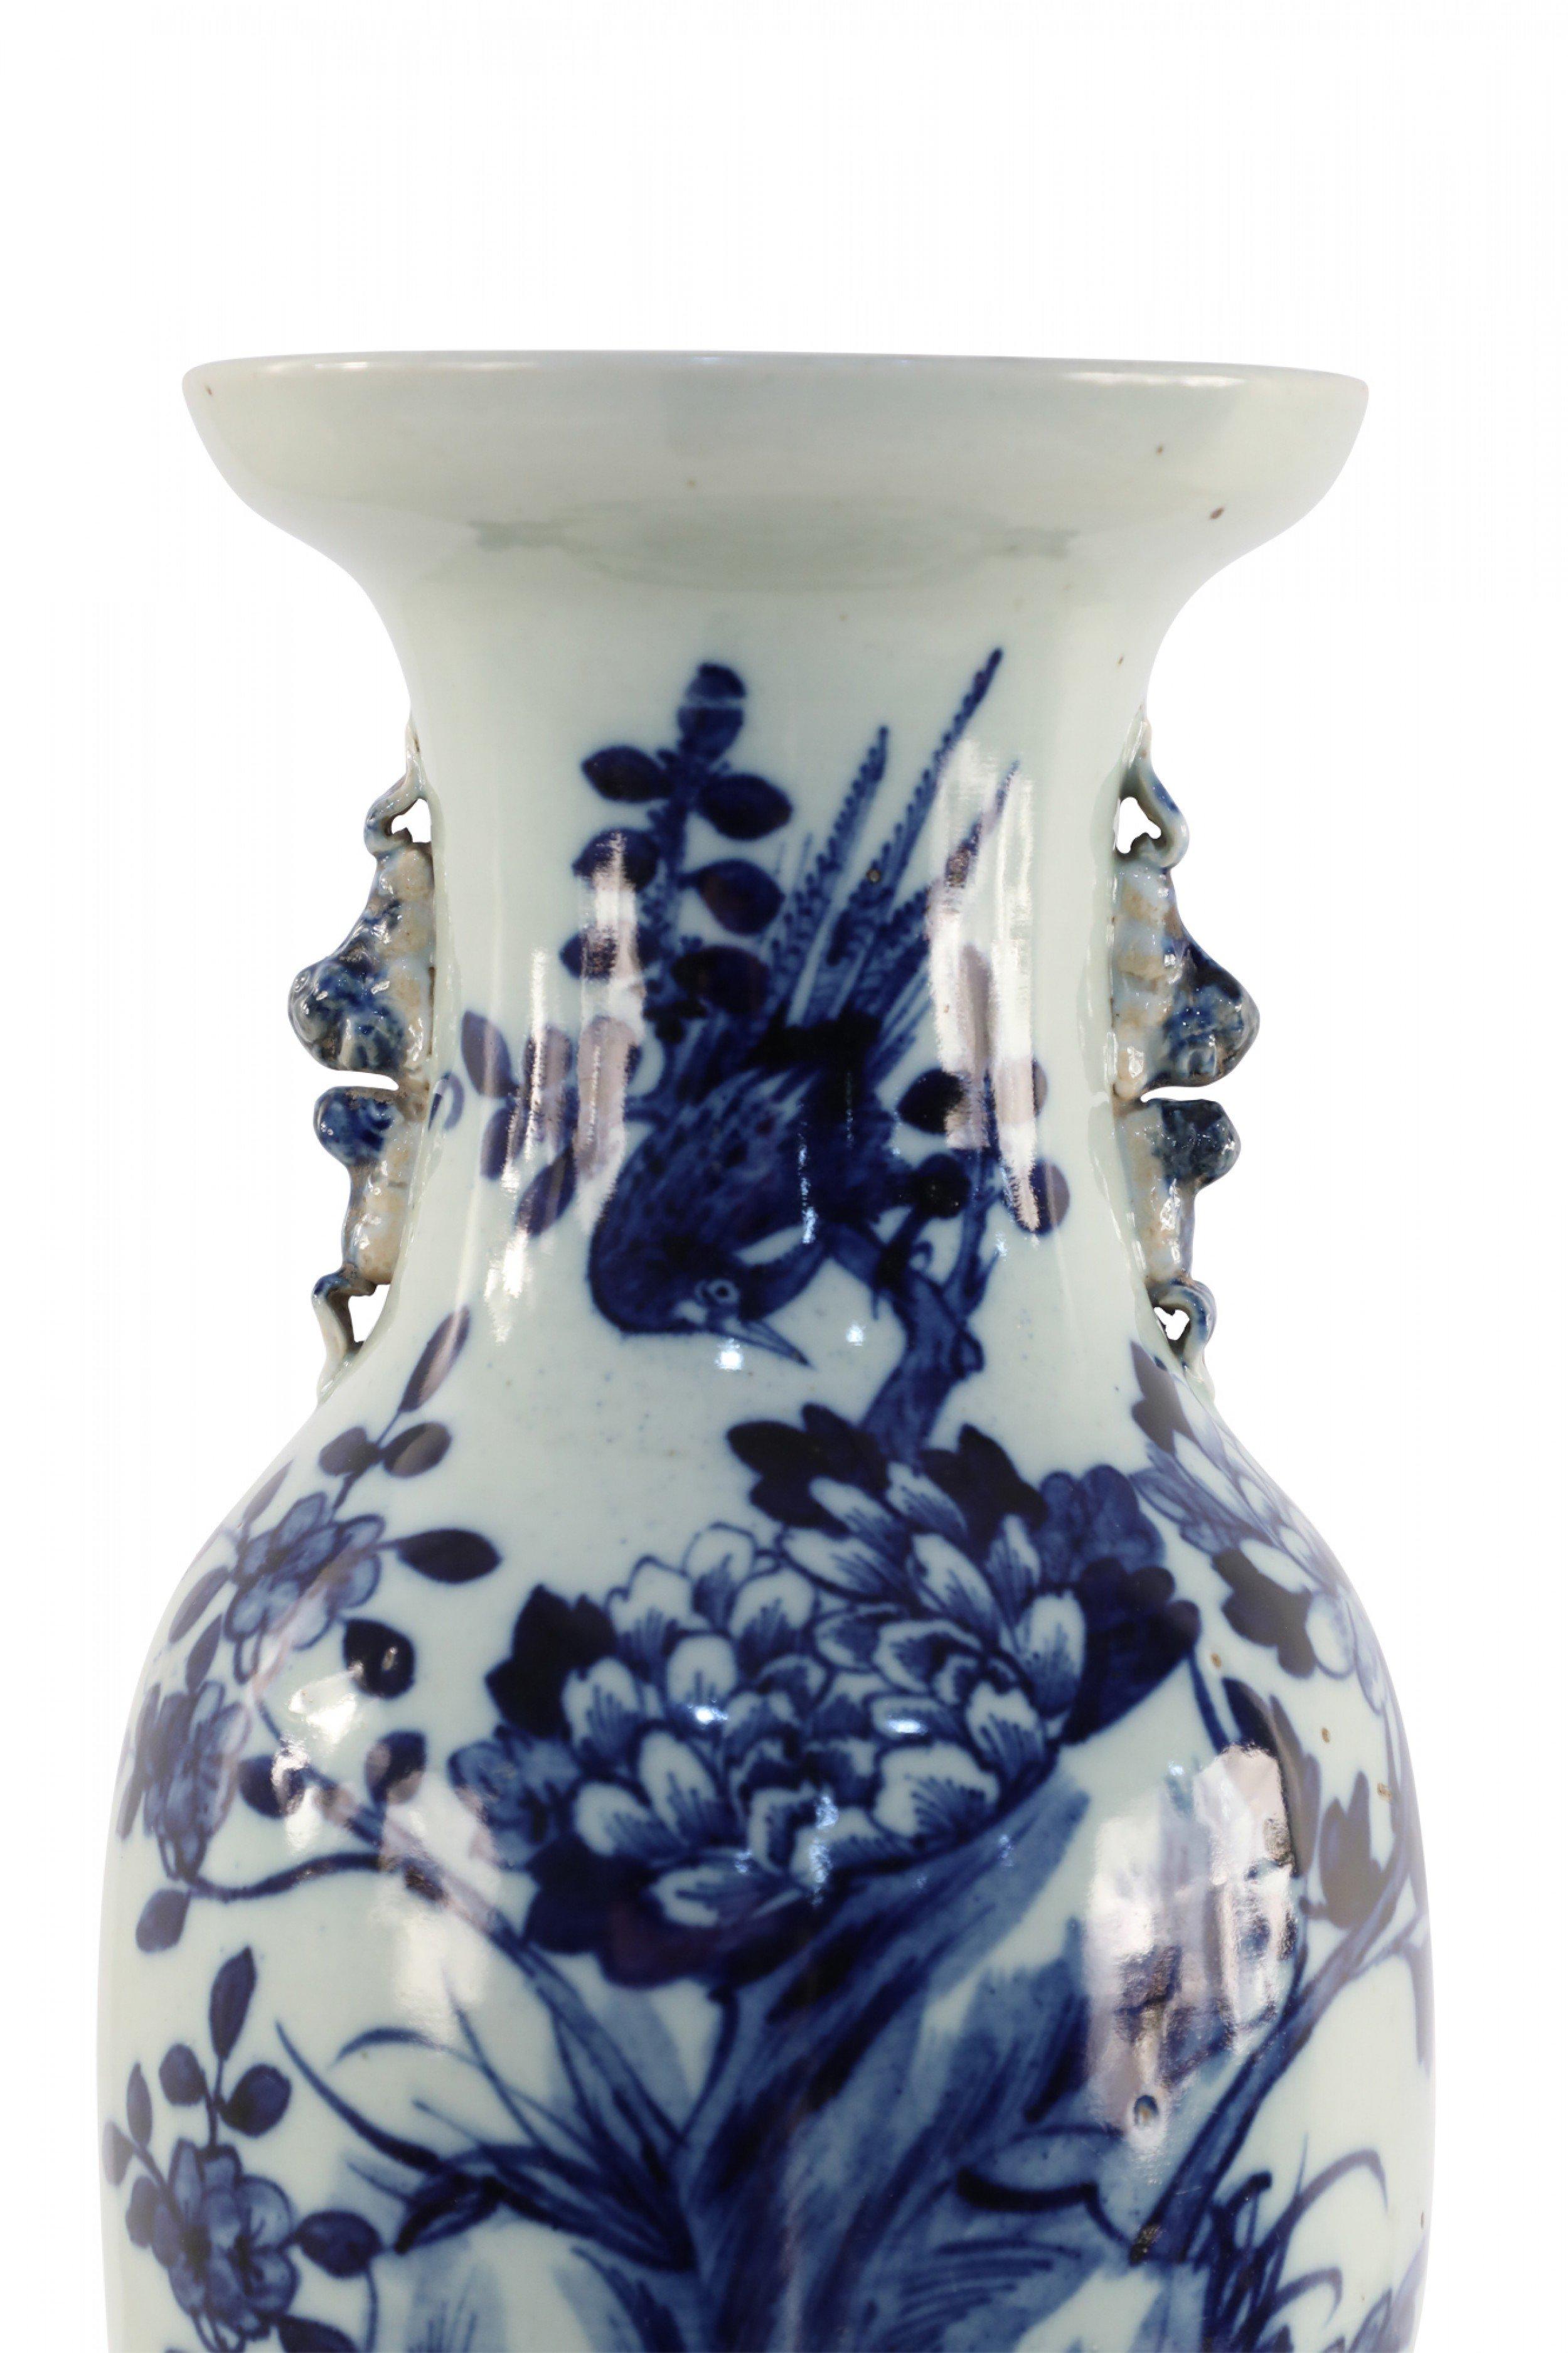 Antique Chinese (Late 19th Century) white, porcelain urn decorated with a blue botanical scene of an oversized peony emerging from a marsh under a bird perched on a flowering branch, and accented with two light blue scrolled handles along the